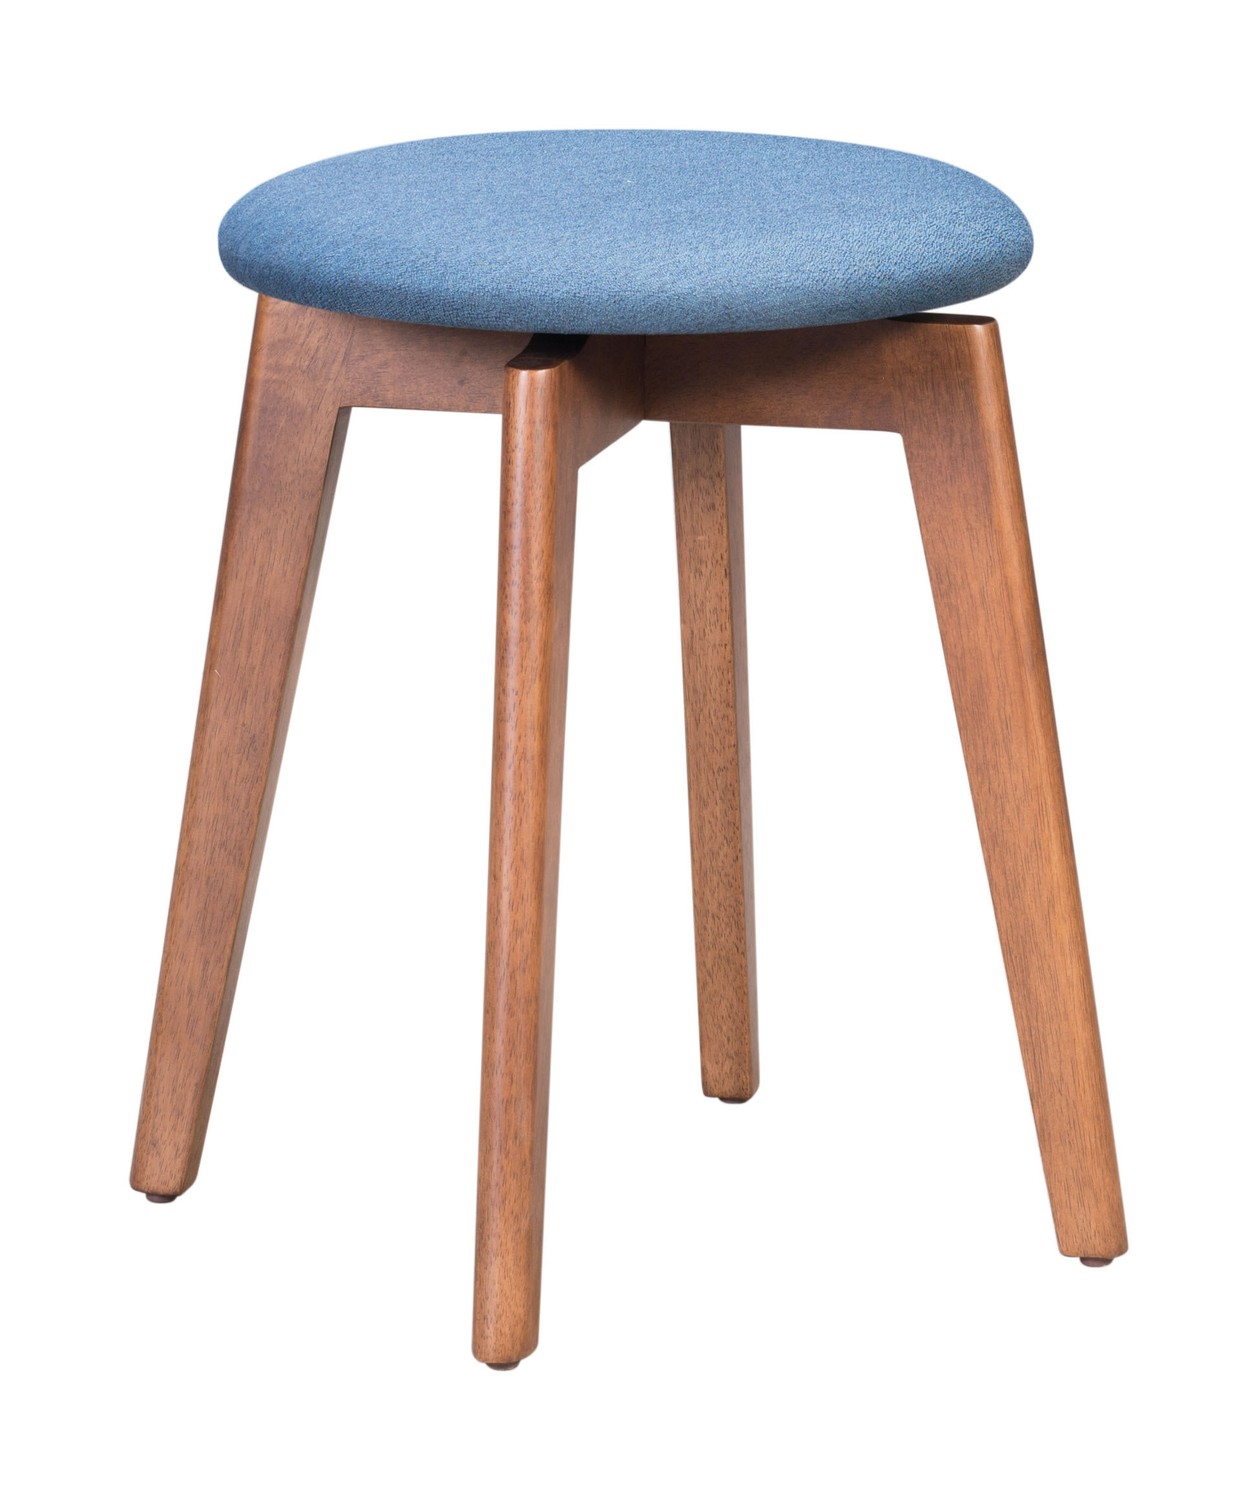 14.4" x 14.4" x 19.3" Walnut and Ink Blue Poly Linen MDF Rubber Wood Stool Set of 2